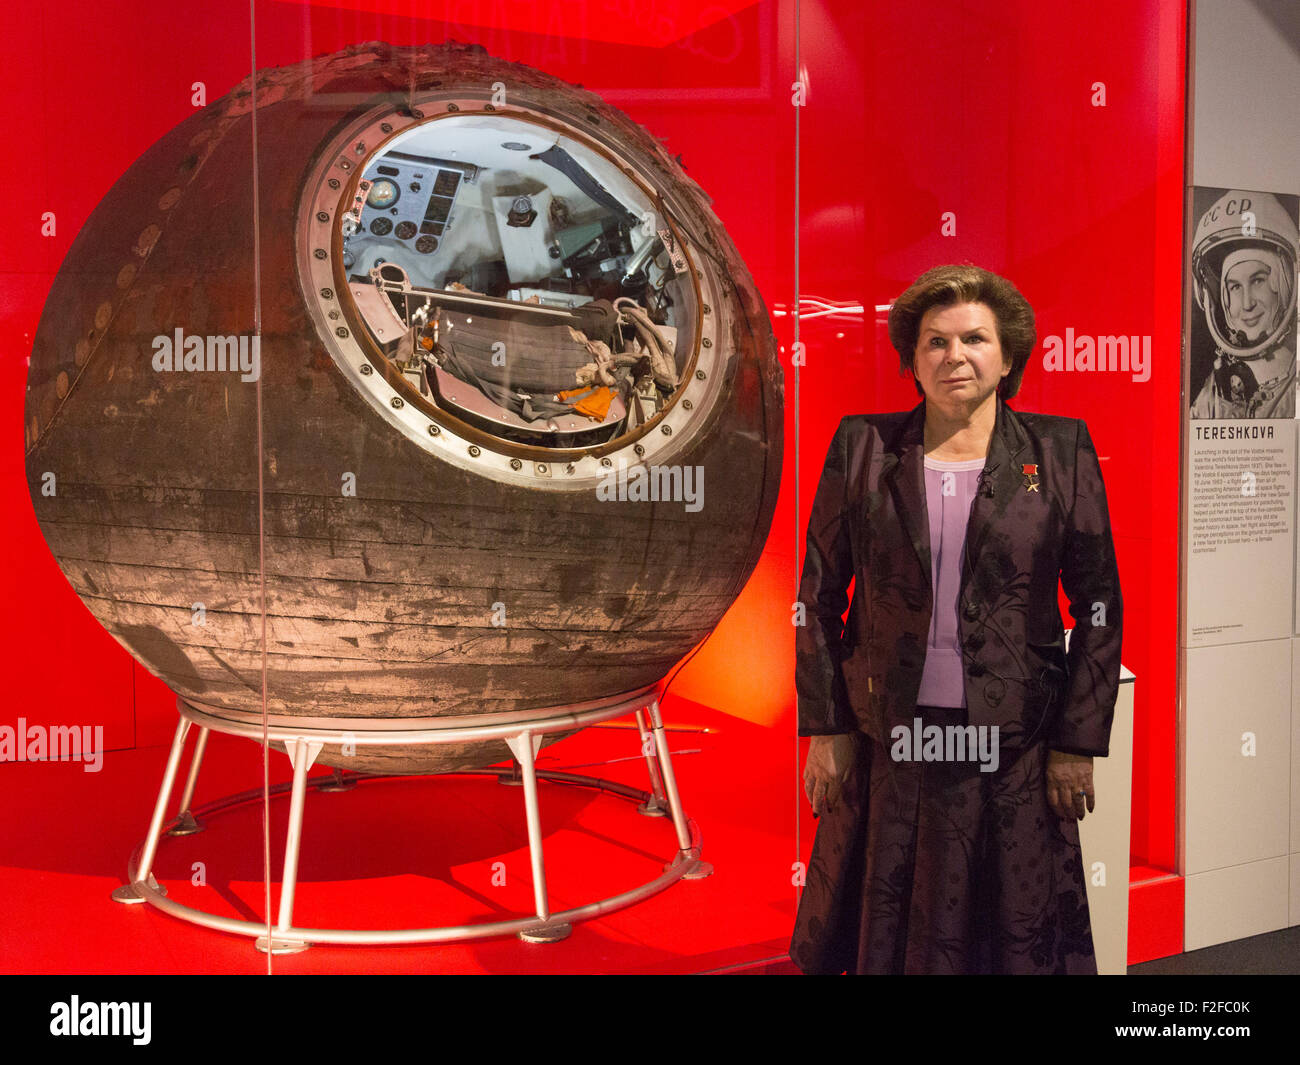 London, UK. 17/09/2015. Valentina Tereshkova opens the exhibition and is reunited with Vostok-6, the actual spacecraft that took her into space. The exhibition Cosmonauts - Birth of the Space Age opens at